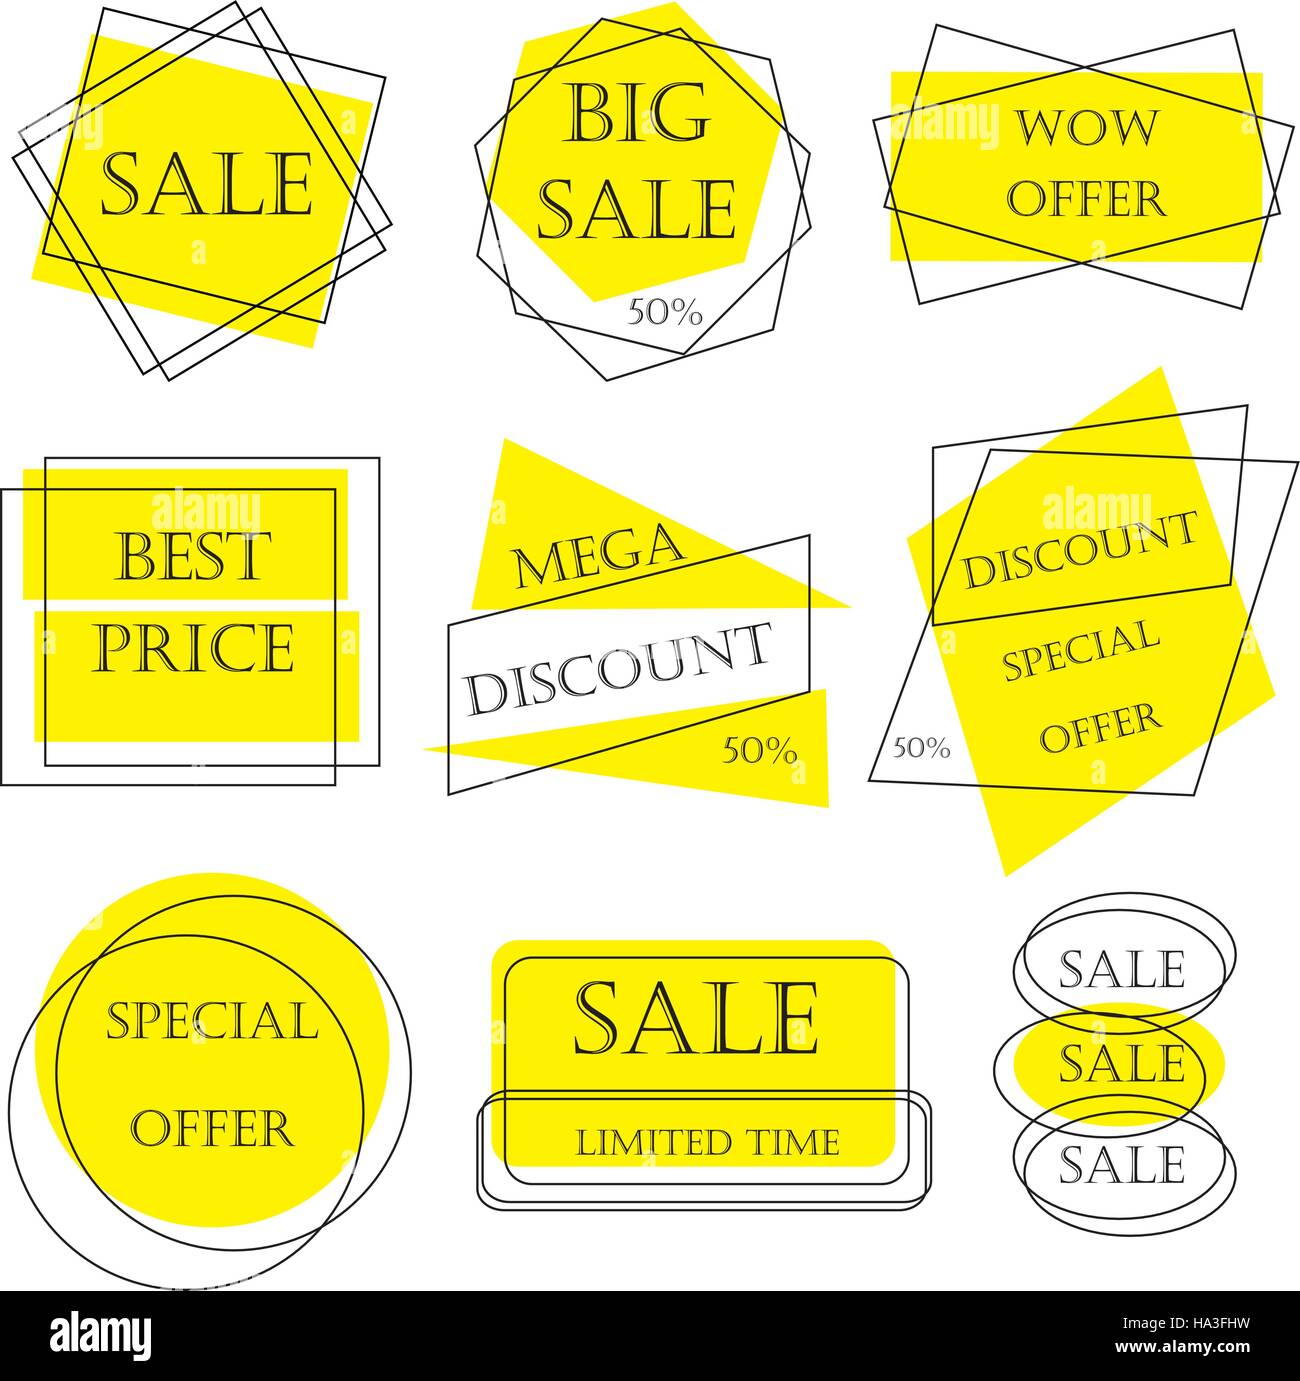 Special offer sale tag discount retail sticker price bundle isolated on white background Stock Vector